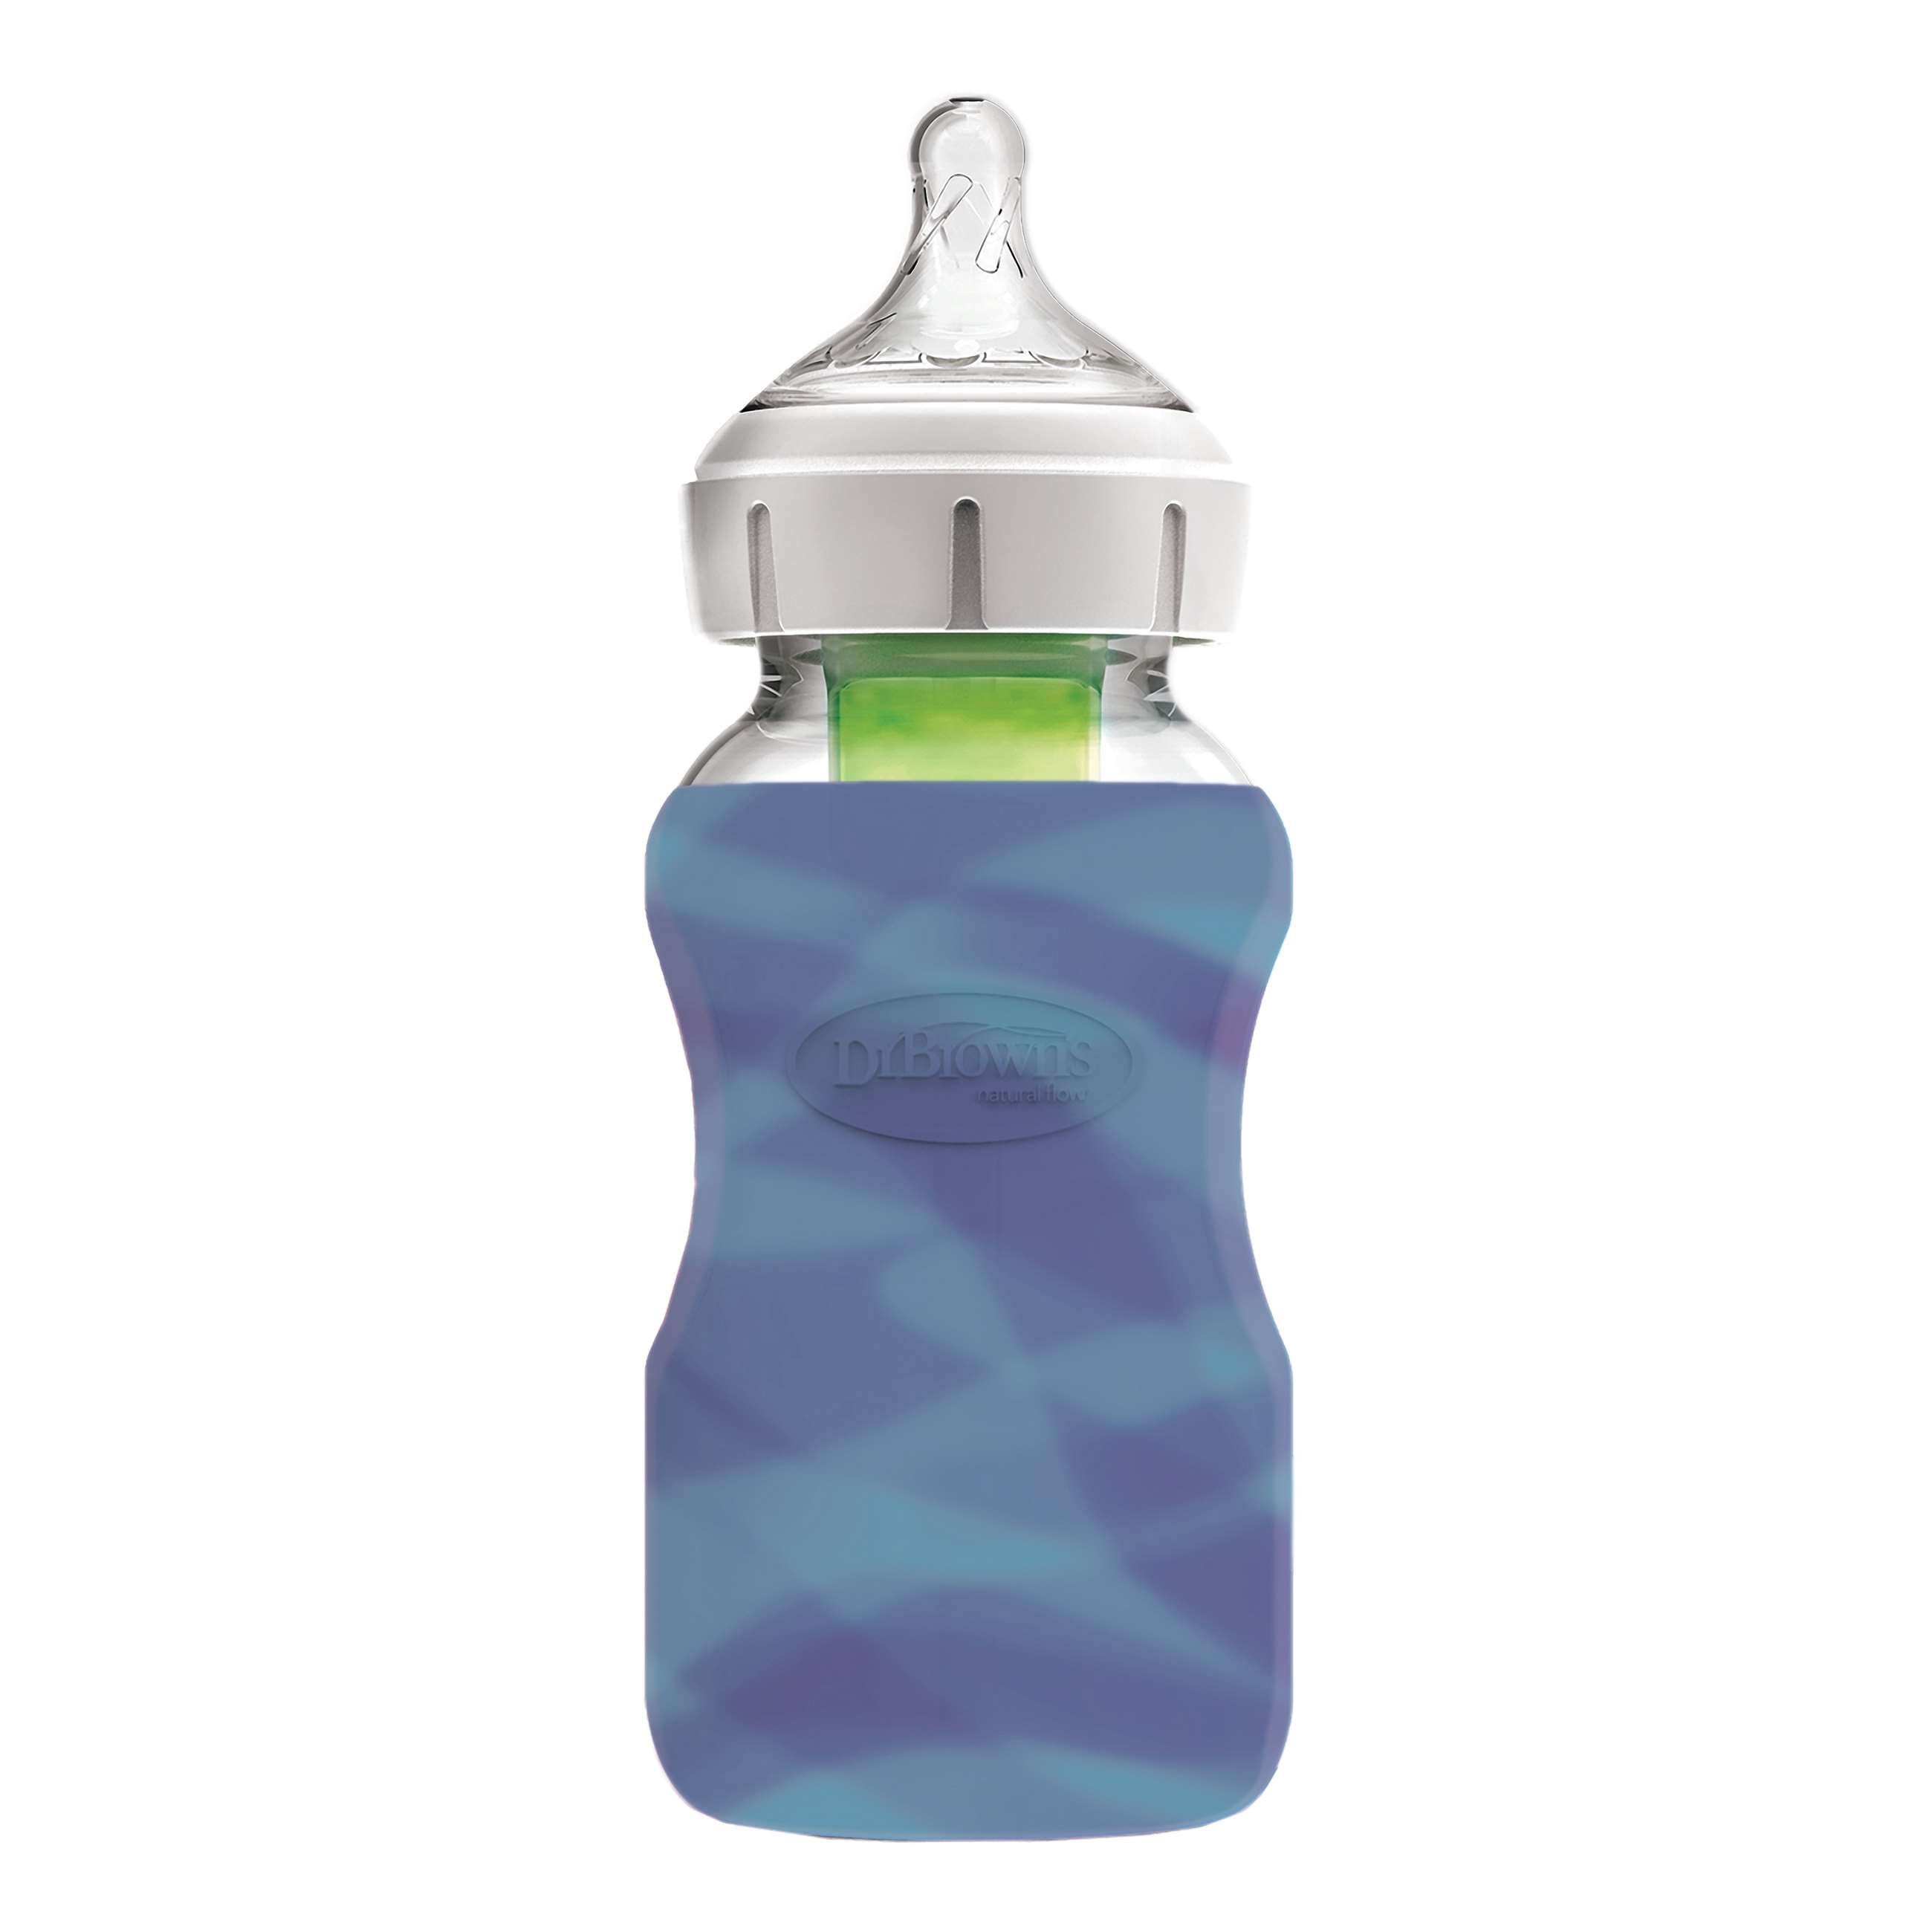 9512 wb91700_ac207_product_options+_wide-neck_glass_bottle_sleeve_9oz_270ml_glow-in-the-dark